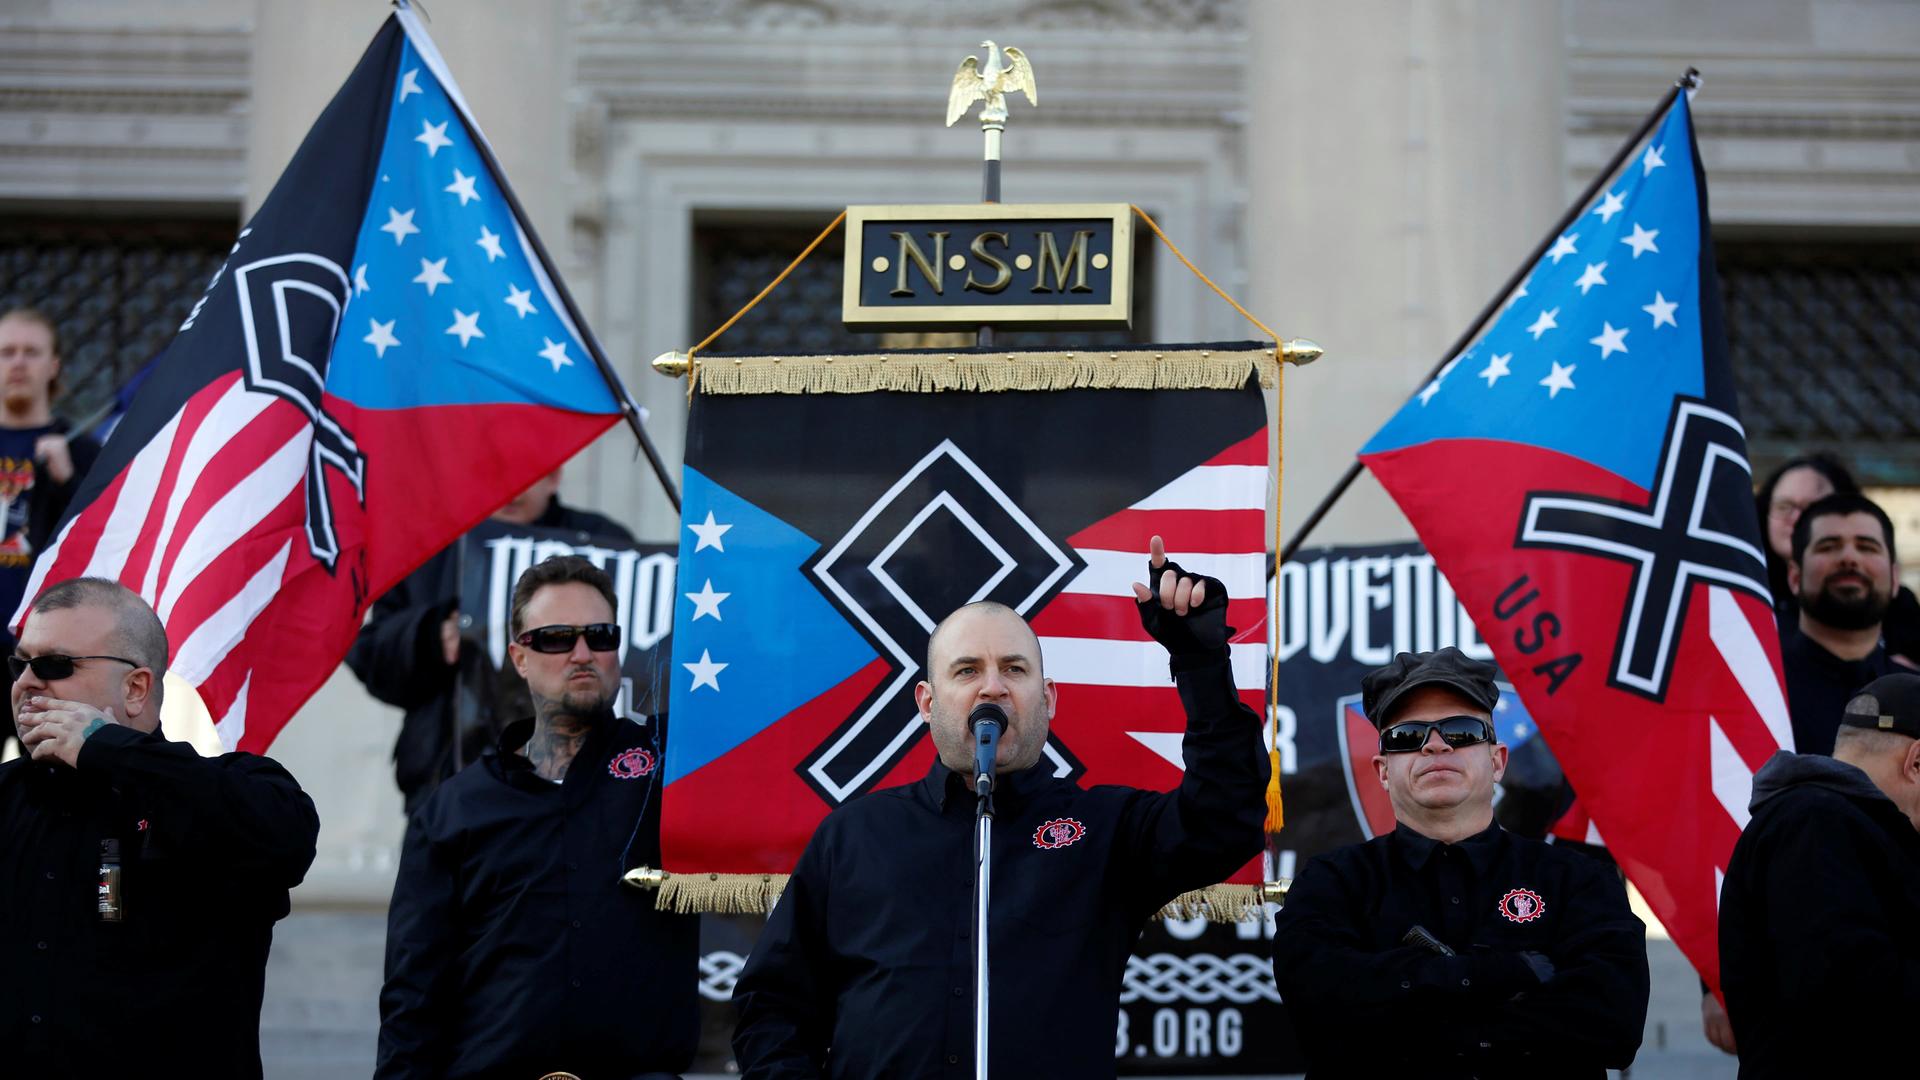 Commander Jeff Schoep of the National Socialist Movement, one of the largest white nationalist type groups in the country, speaks during a rally at the state capital in Little Rock, Arkansas,